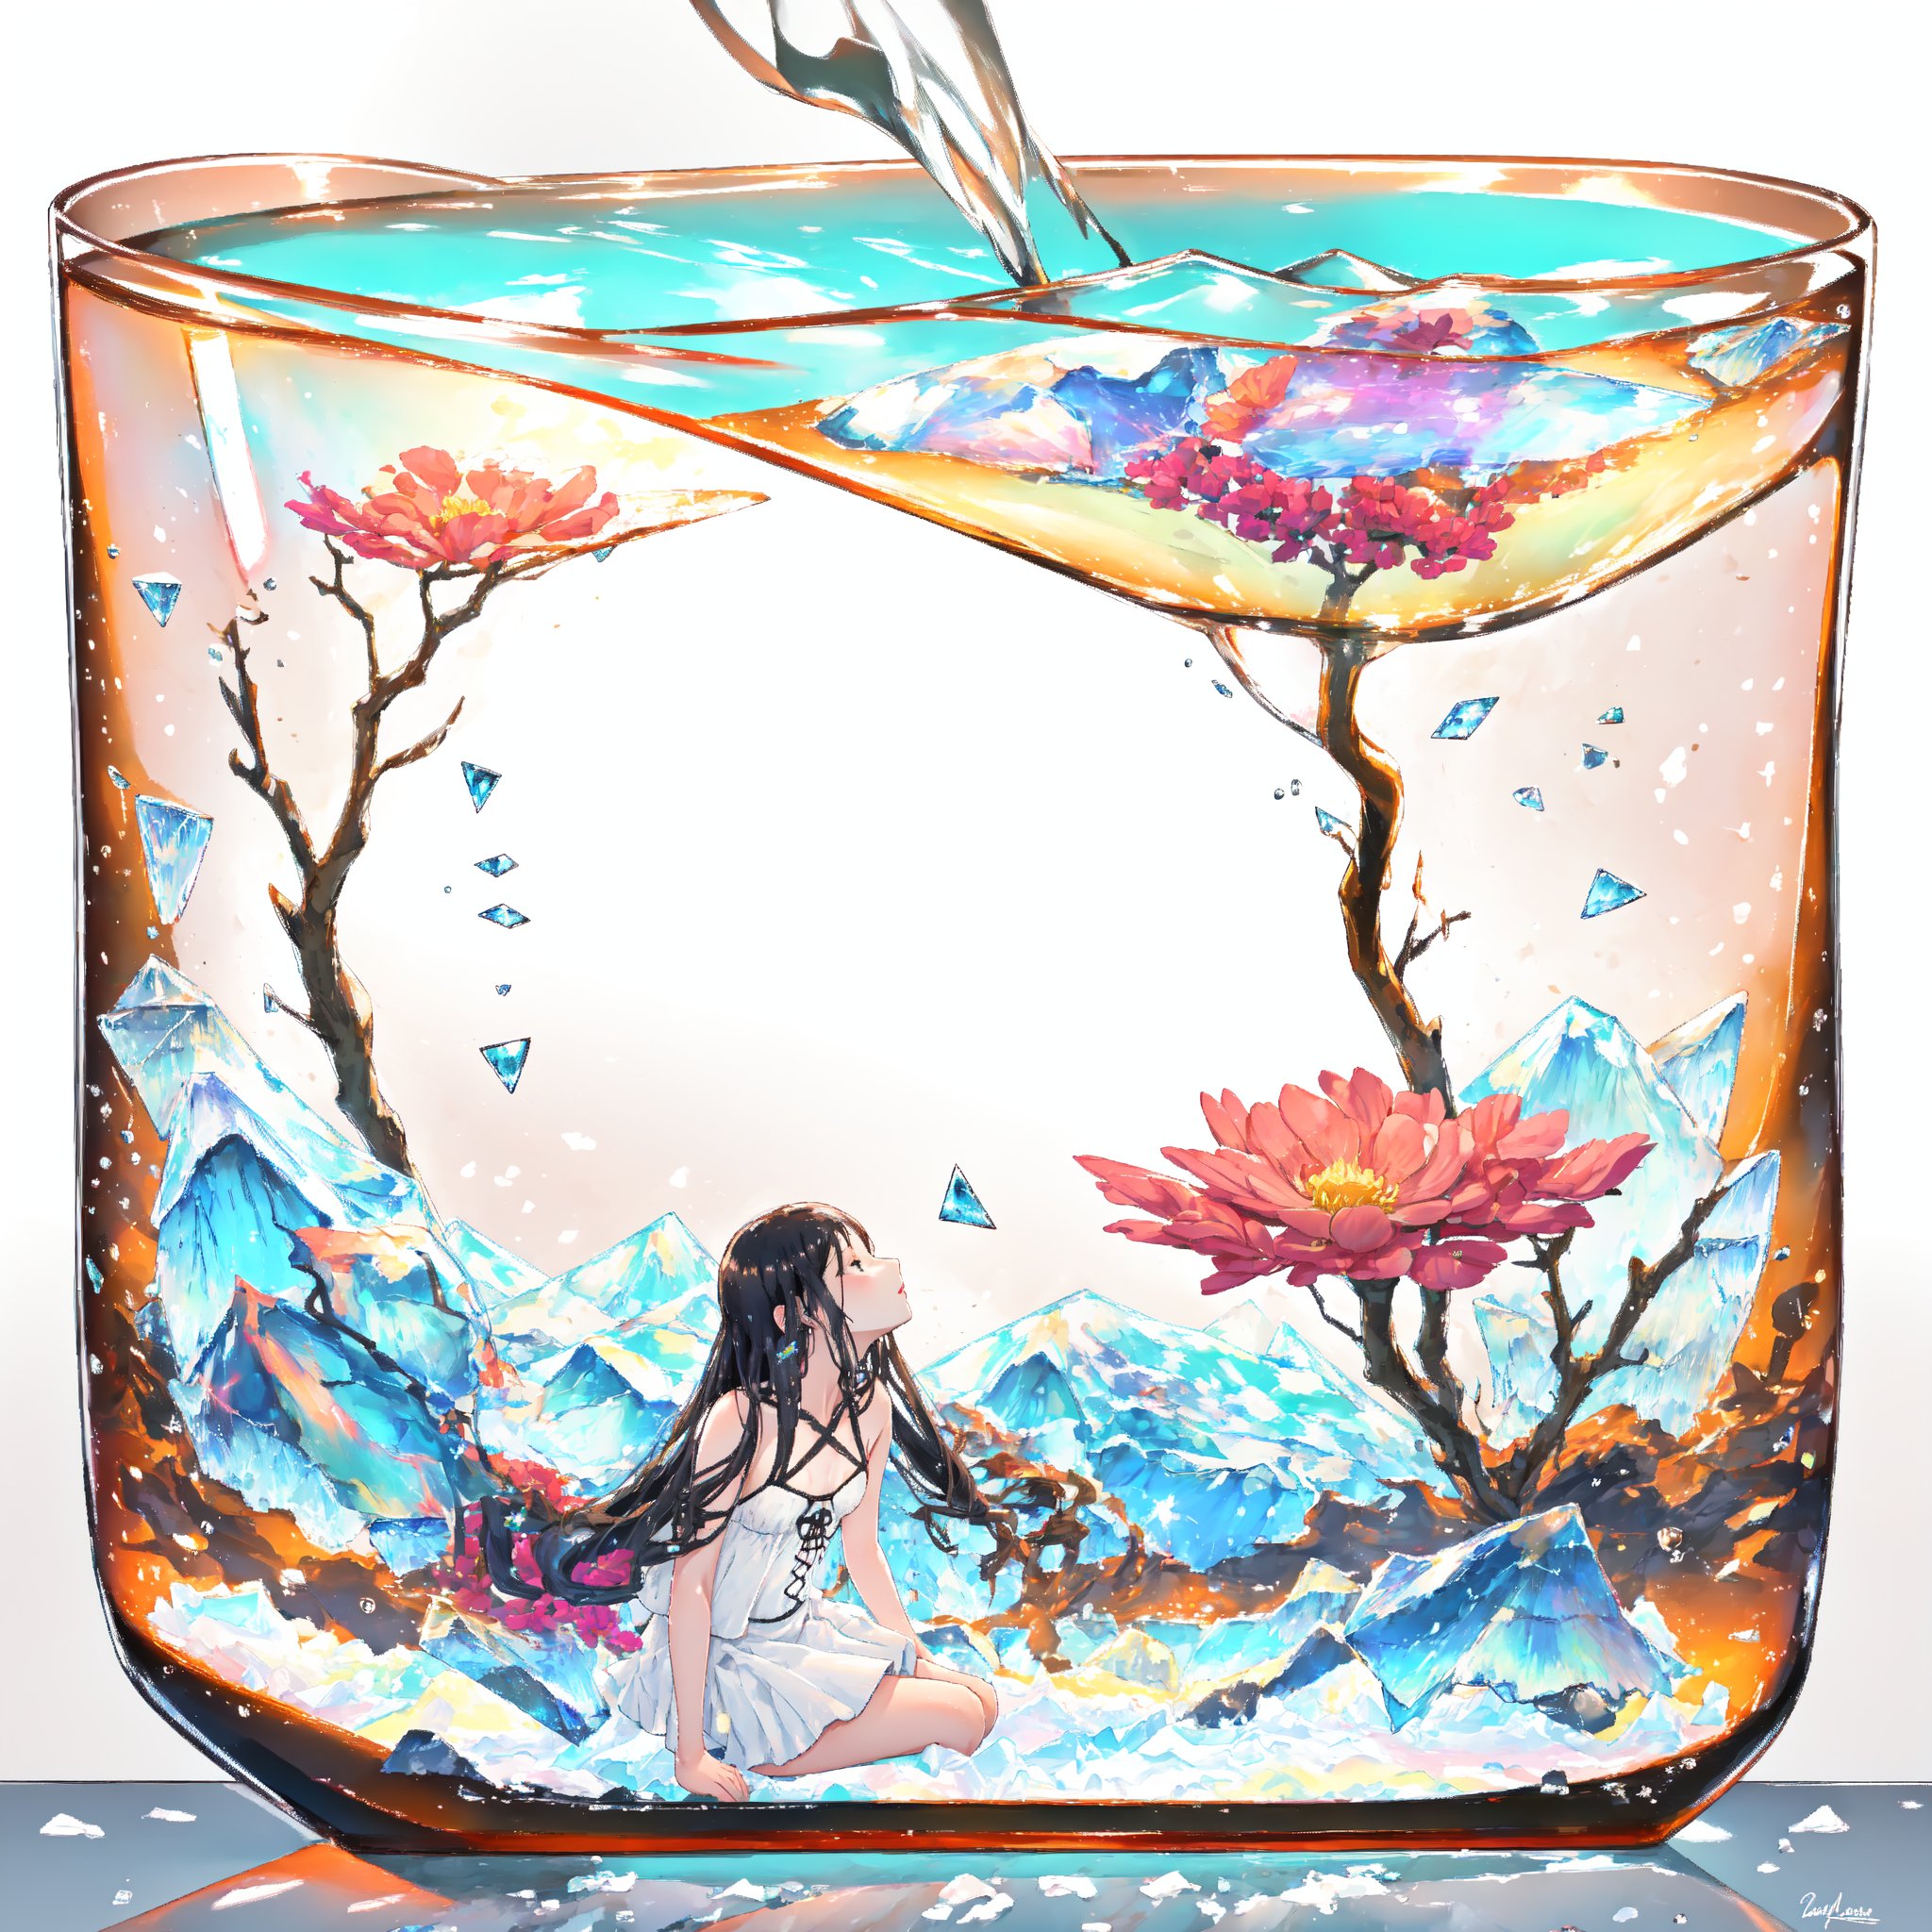 girl in a pink dress, long black hair, sitting on the edge of a gin and tonic glass filled with water and 3 small ice cubes, with some decorative flowers, flowers in the background, water drops in the glass created by the ice. white background, reflections, hd, bright colors.,white camisole